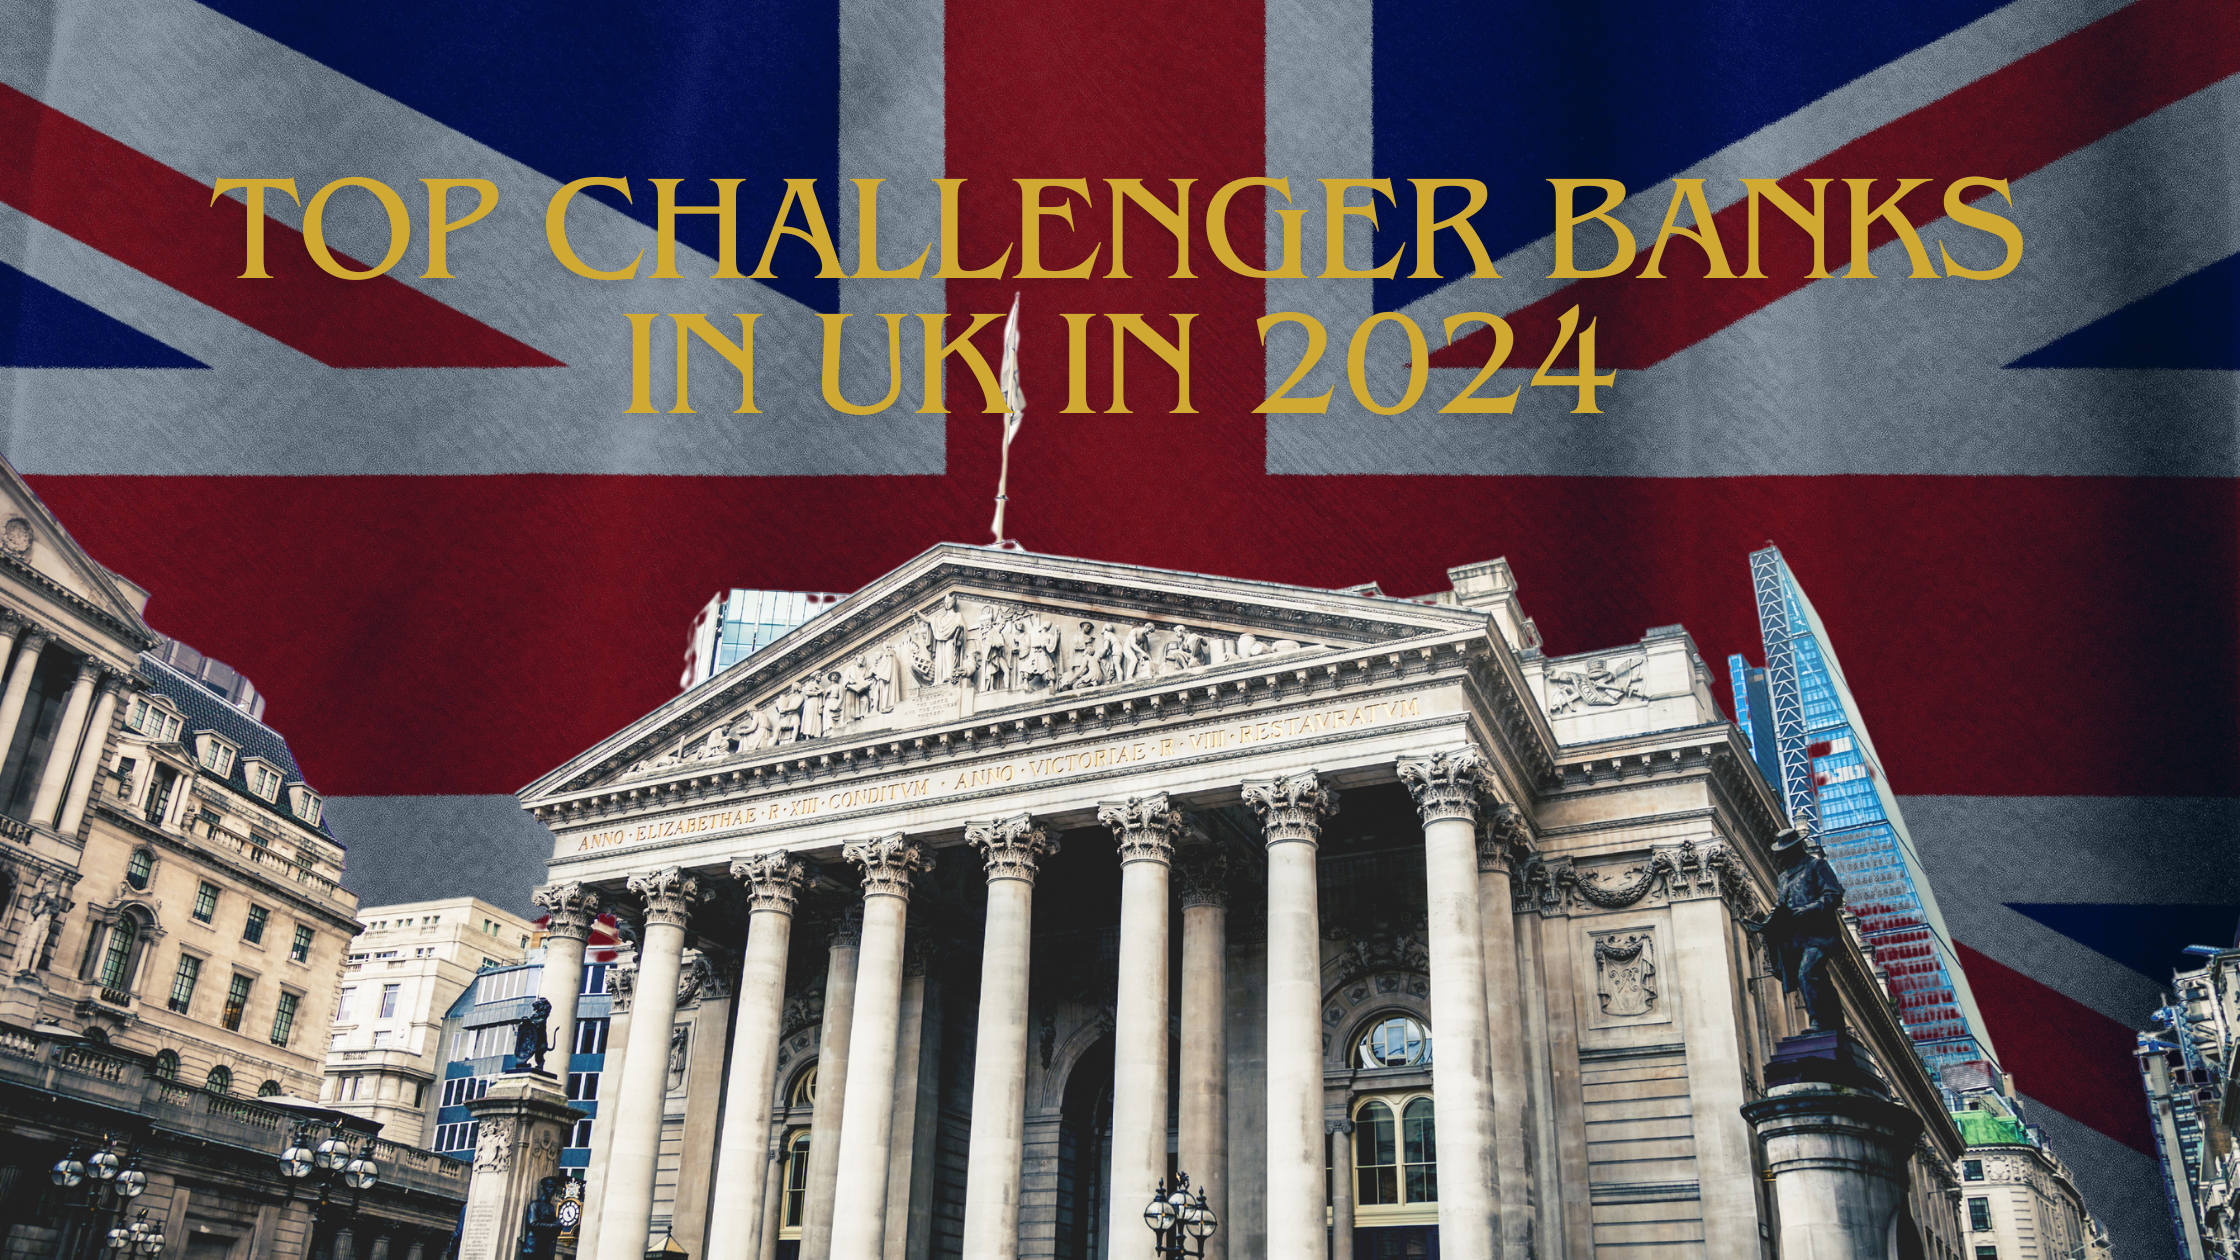 You are currently viewing Top Challenger Banks in UK in 2024